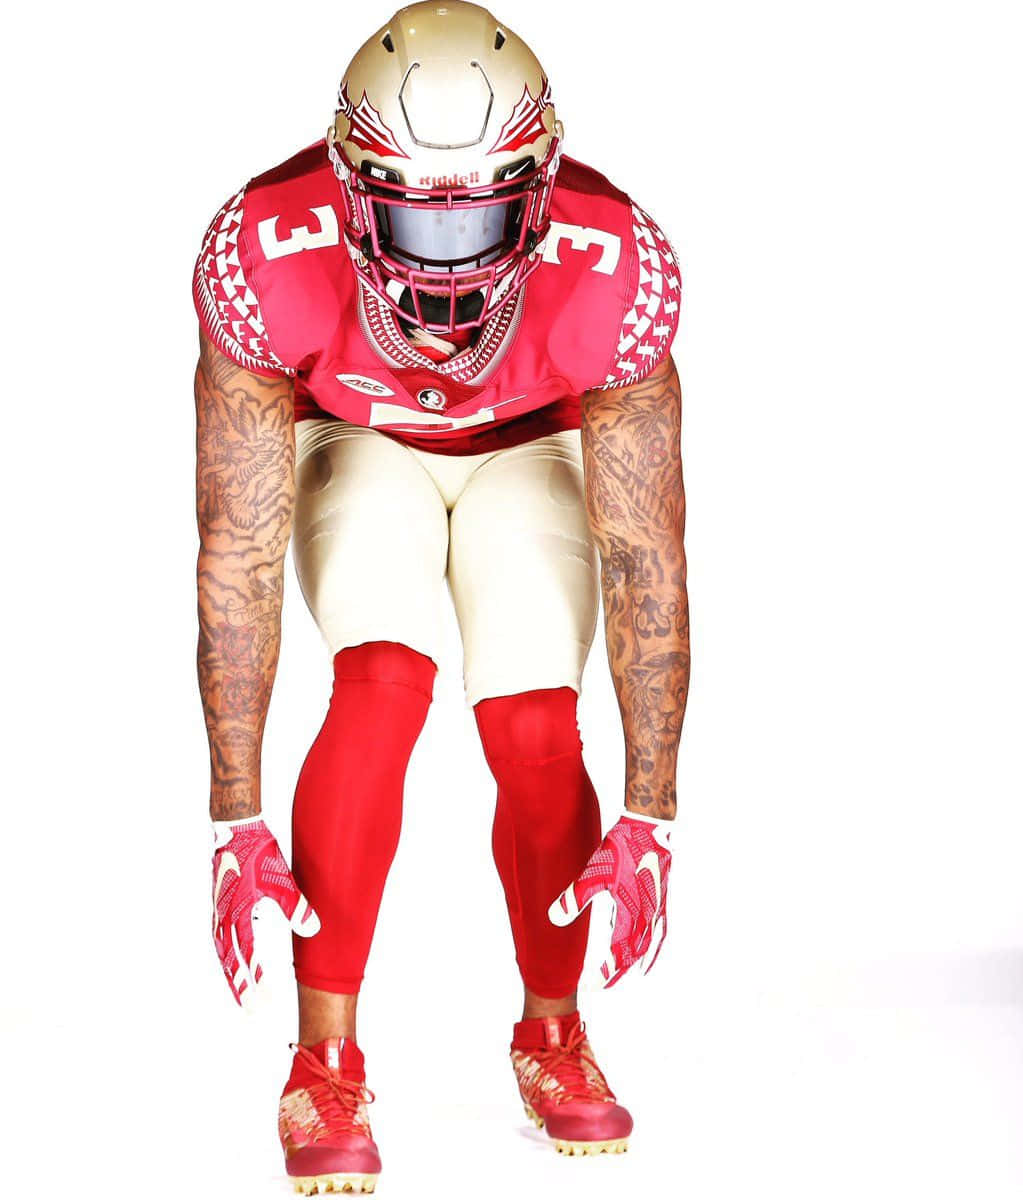 Derwinjames Florida State Seminoles Photoshoot Would Be Translated To Derwin James Florida State Seminoles Fotografering. However, In The Context Of Computer Or Mobile Wallpaper, It Would Be More Appropriate To Say Derwin James Florida State Seminoles Bakgrundsbild (background Image). Wallpaper